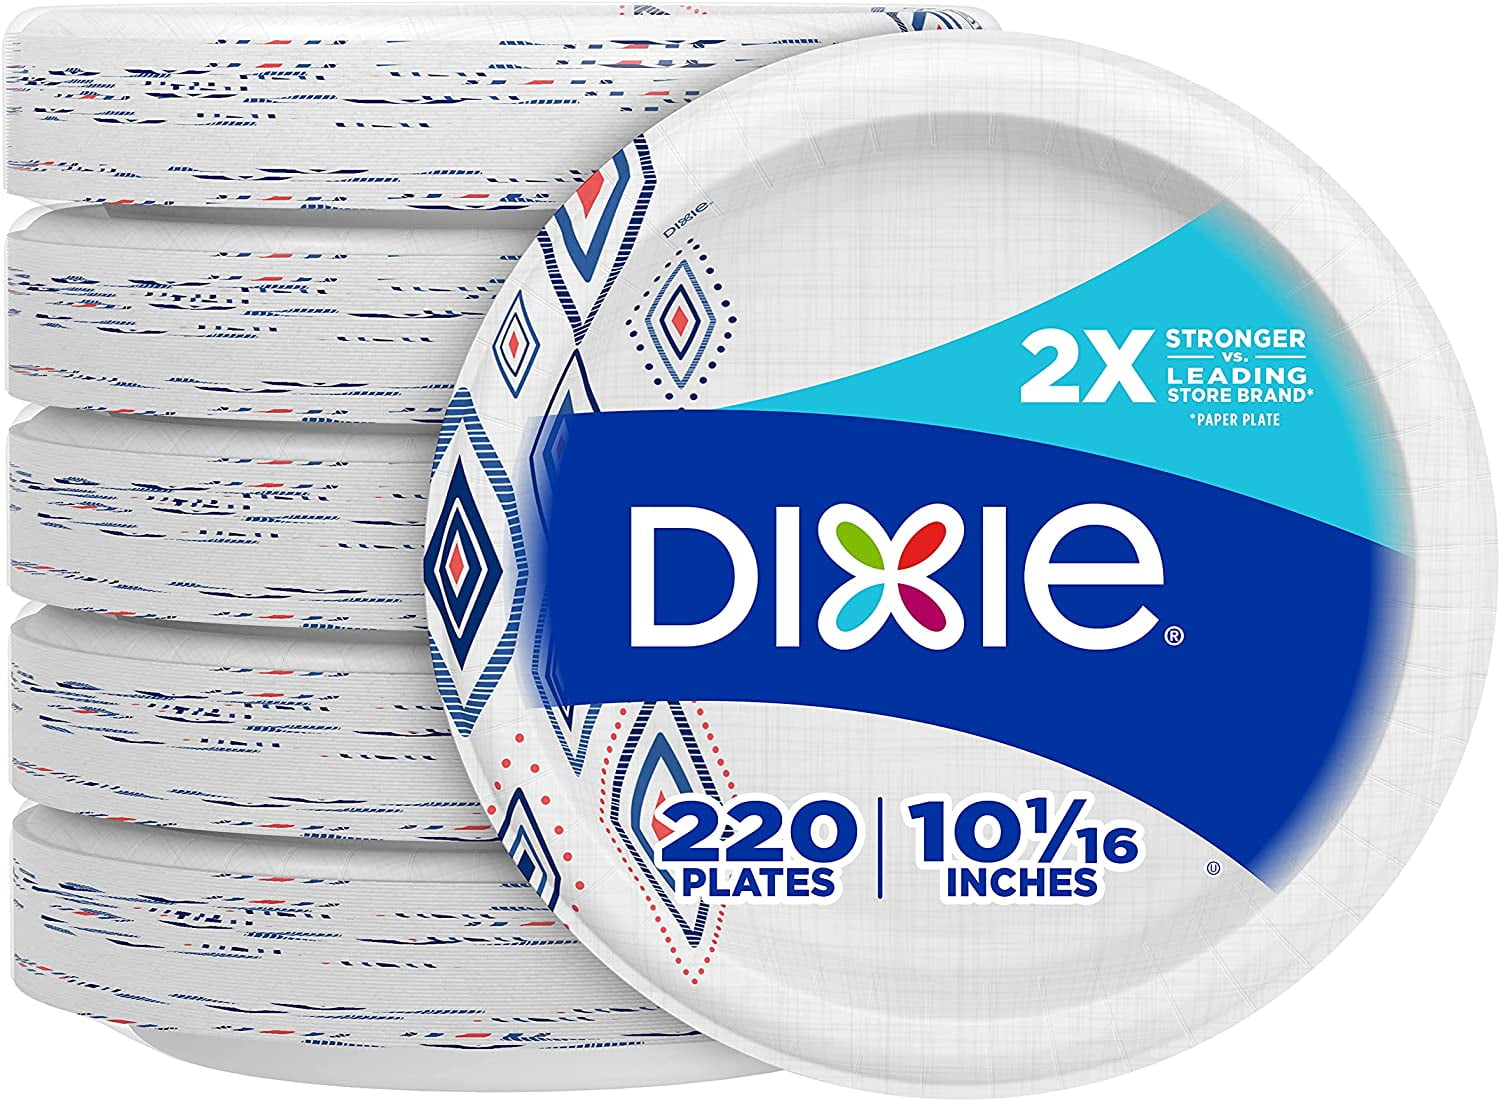  Dixie Everyday Paper Plates, 10 1/16, 220 Count, 5 Packs of 44  Plates, Dinner Size Printed Disposable Plates : Health & Household